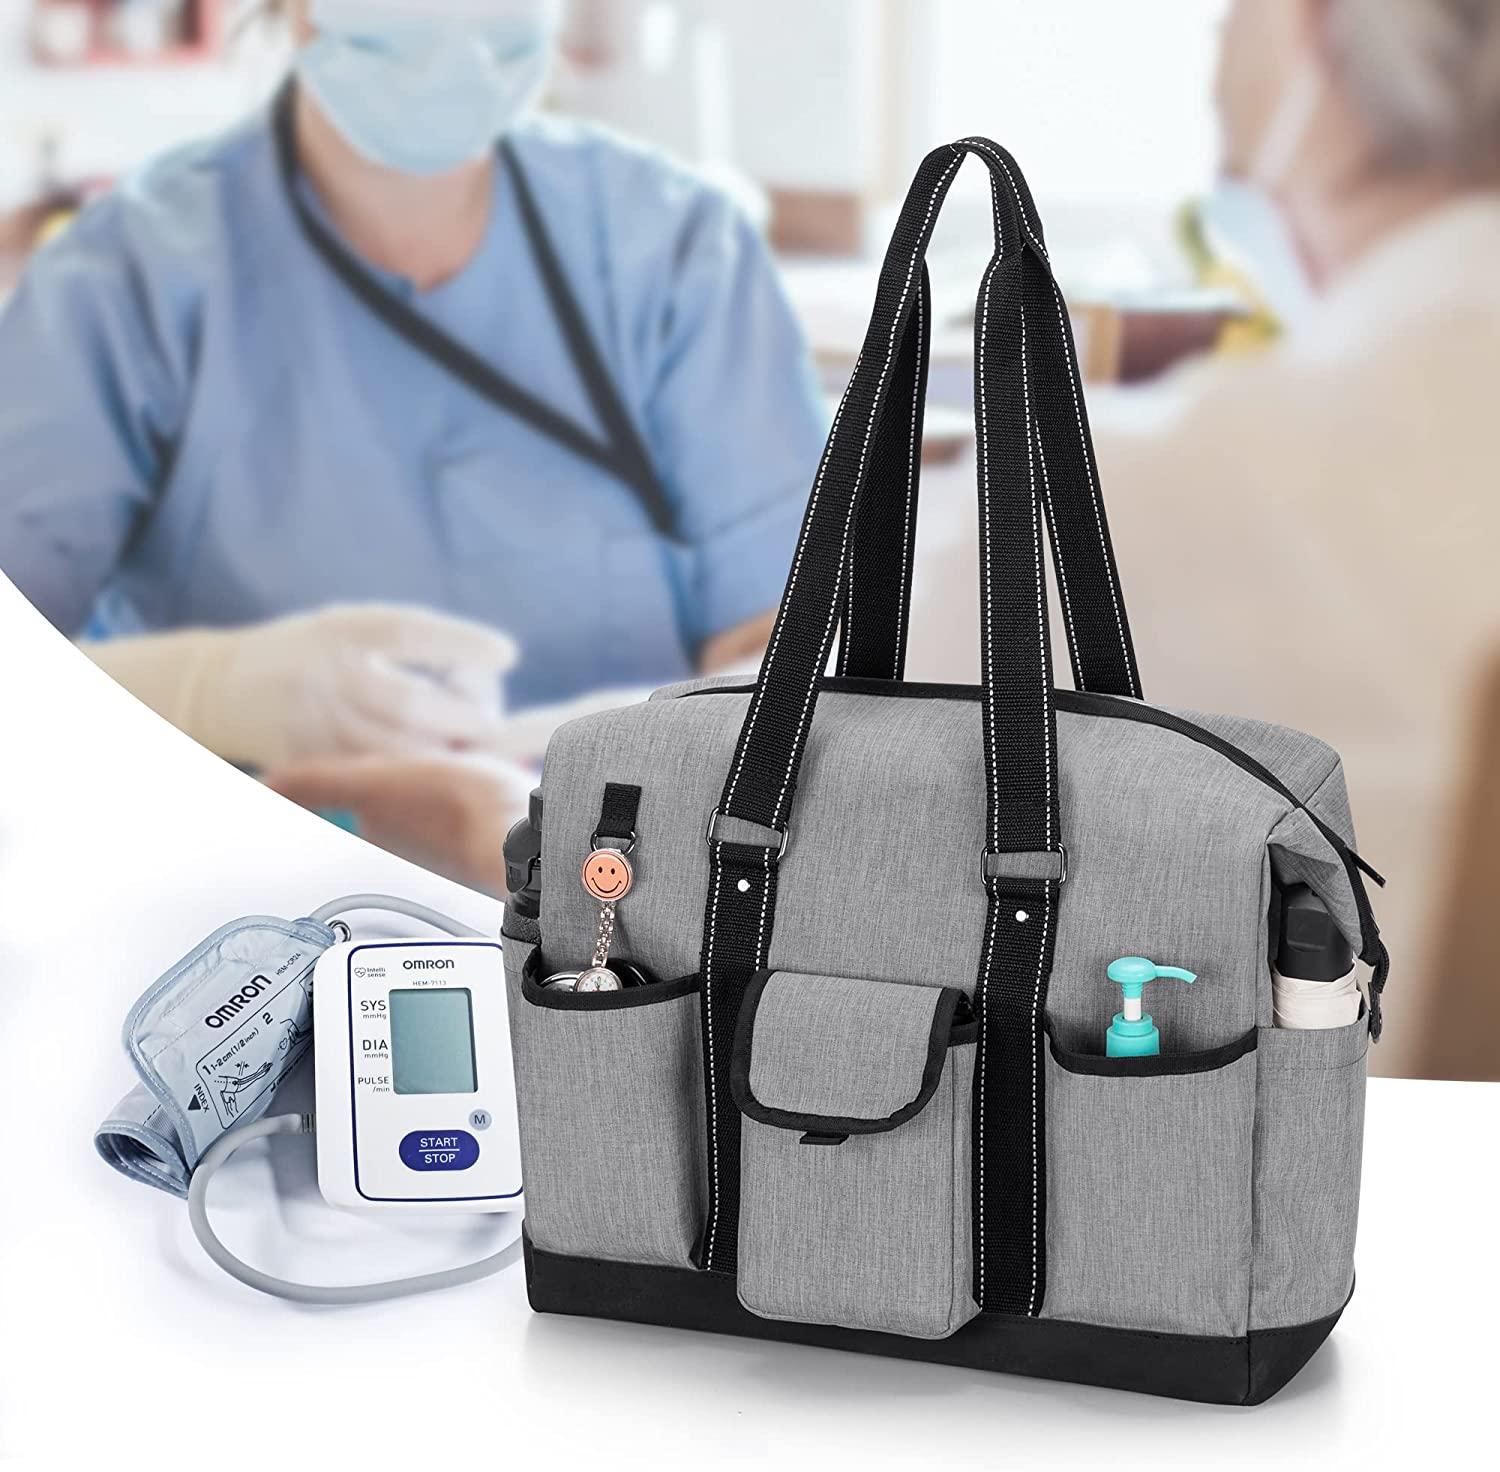 Damero Nurse Tote Bags with Organizer Insert Bag, Medical Supplies Bags  with Laptop Sleeve for Home Care Nurse, Medical Students and More, Gray